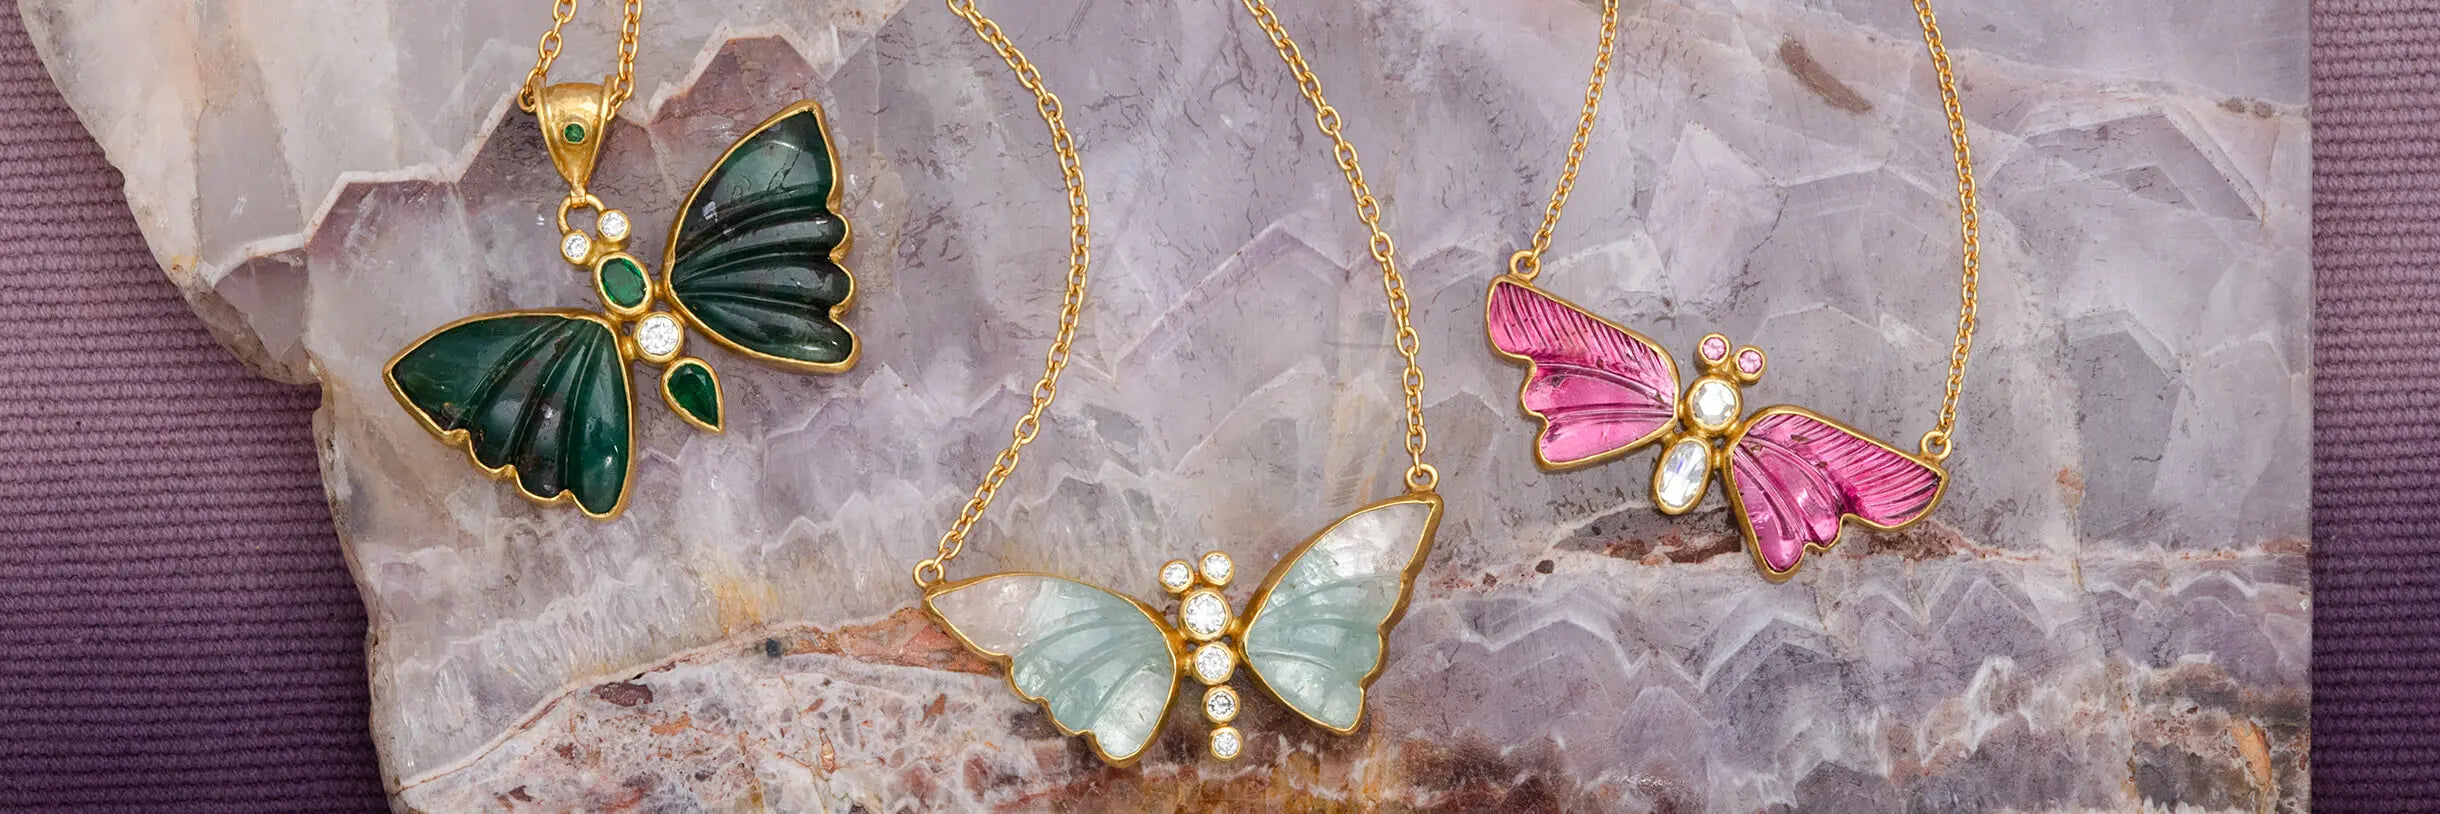 Jewelry that Takes Flight: The Inspiration Behind GURHAN's Butterfly Collection